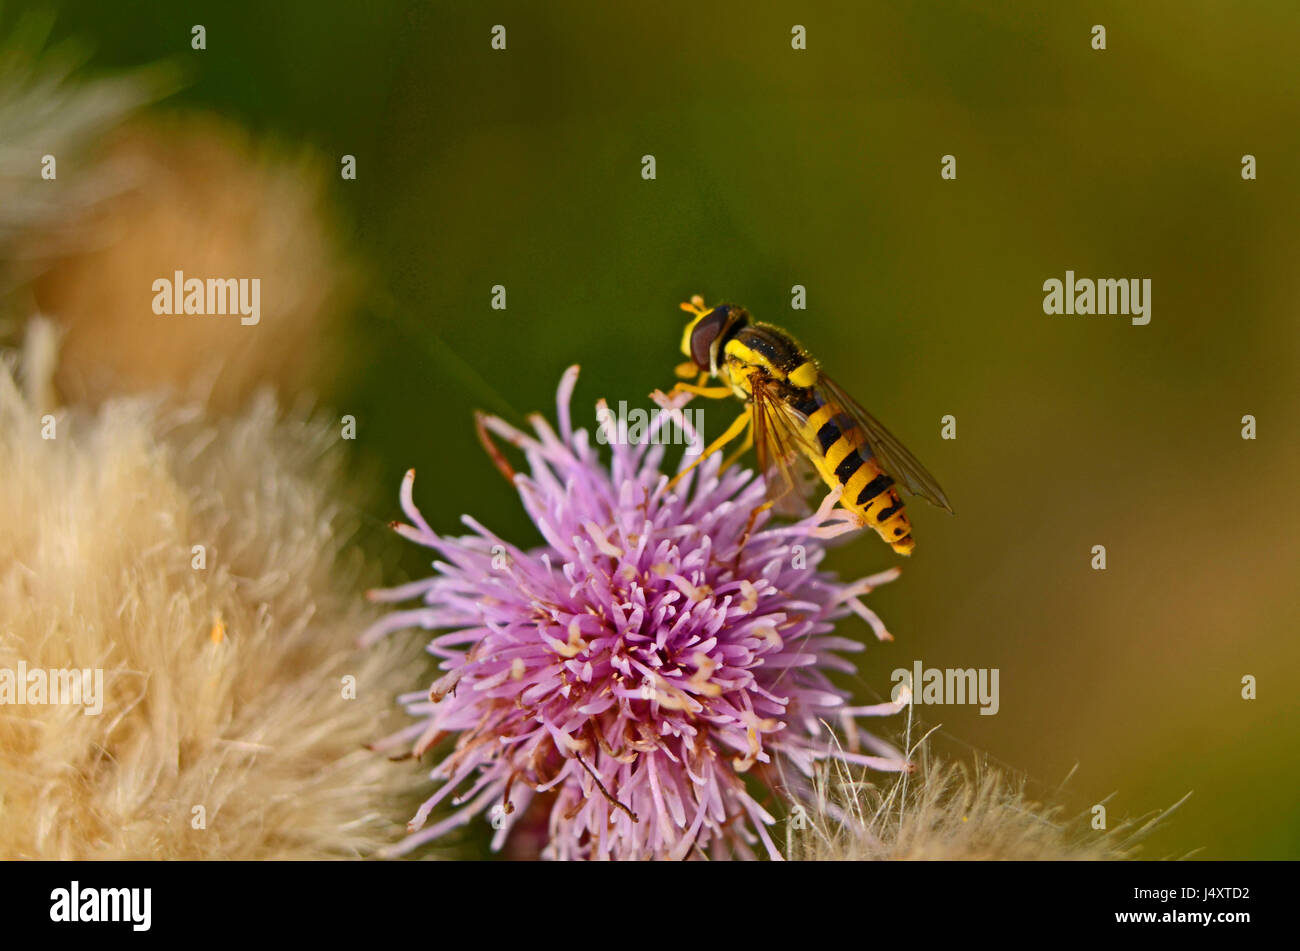 Hoverfly on a flower Stock Photo